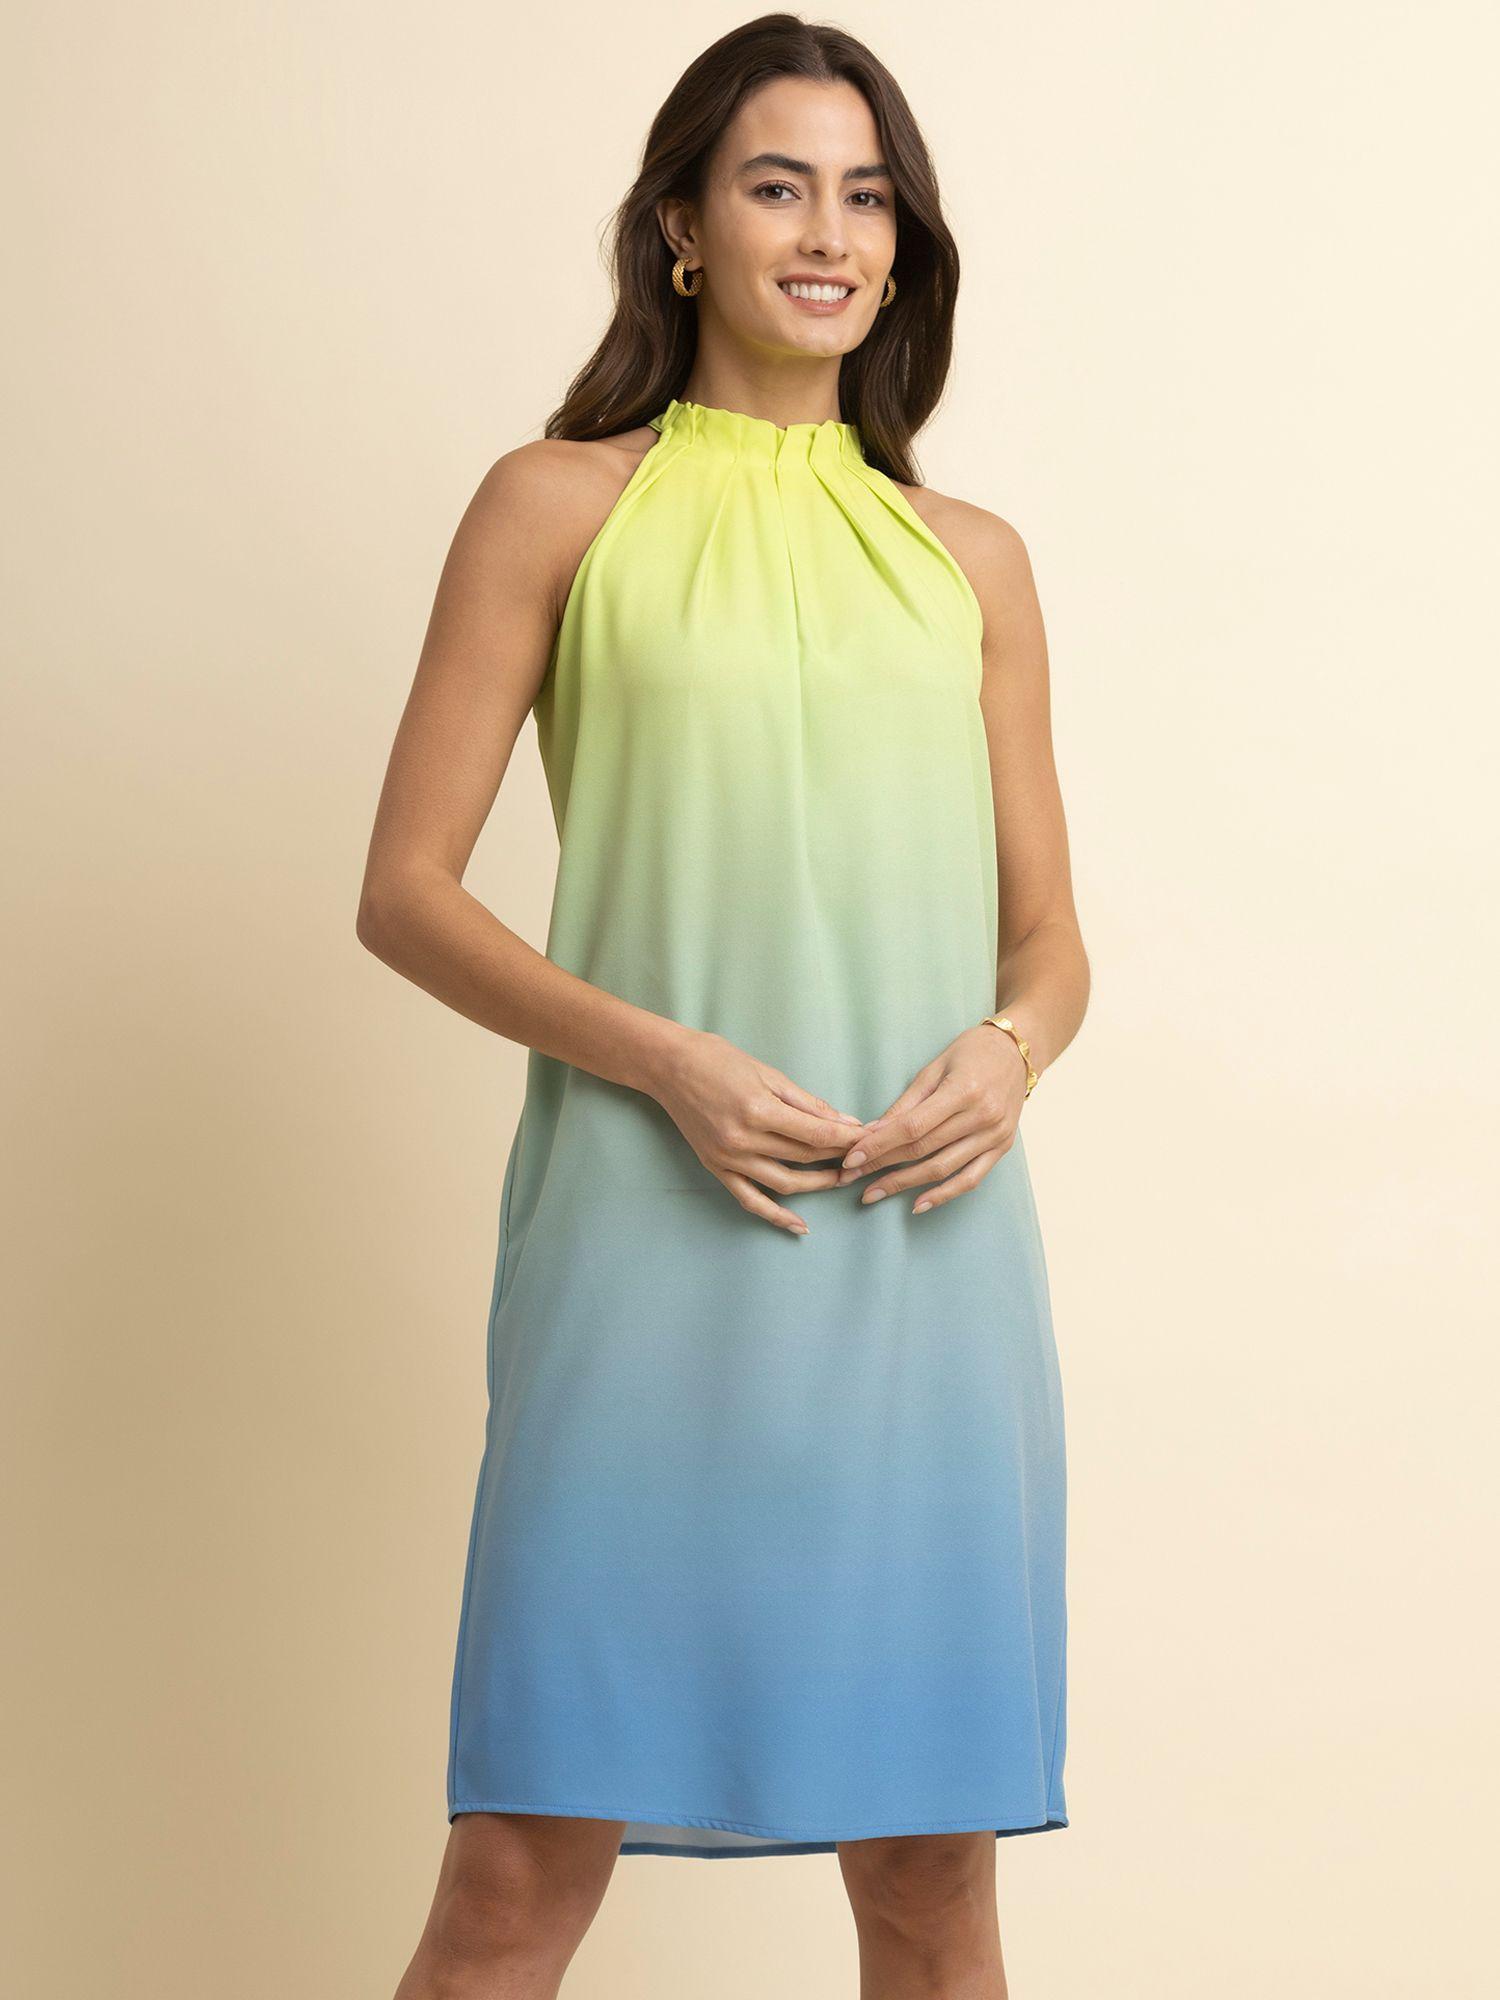 box pleat ombre dress - green and blue